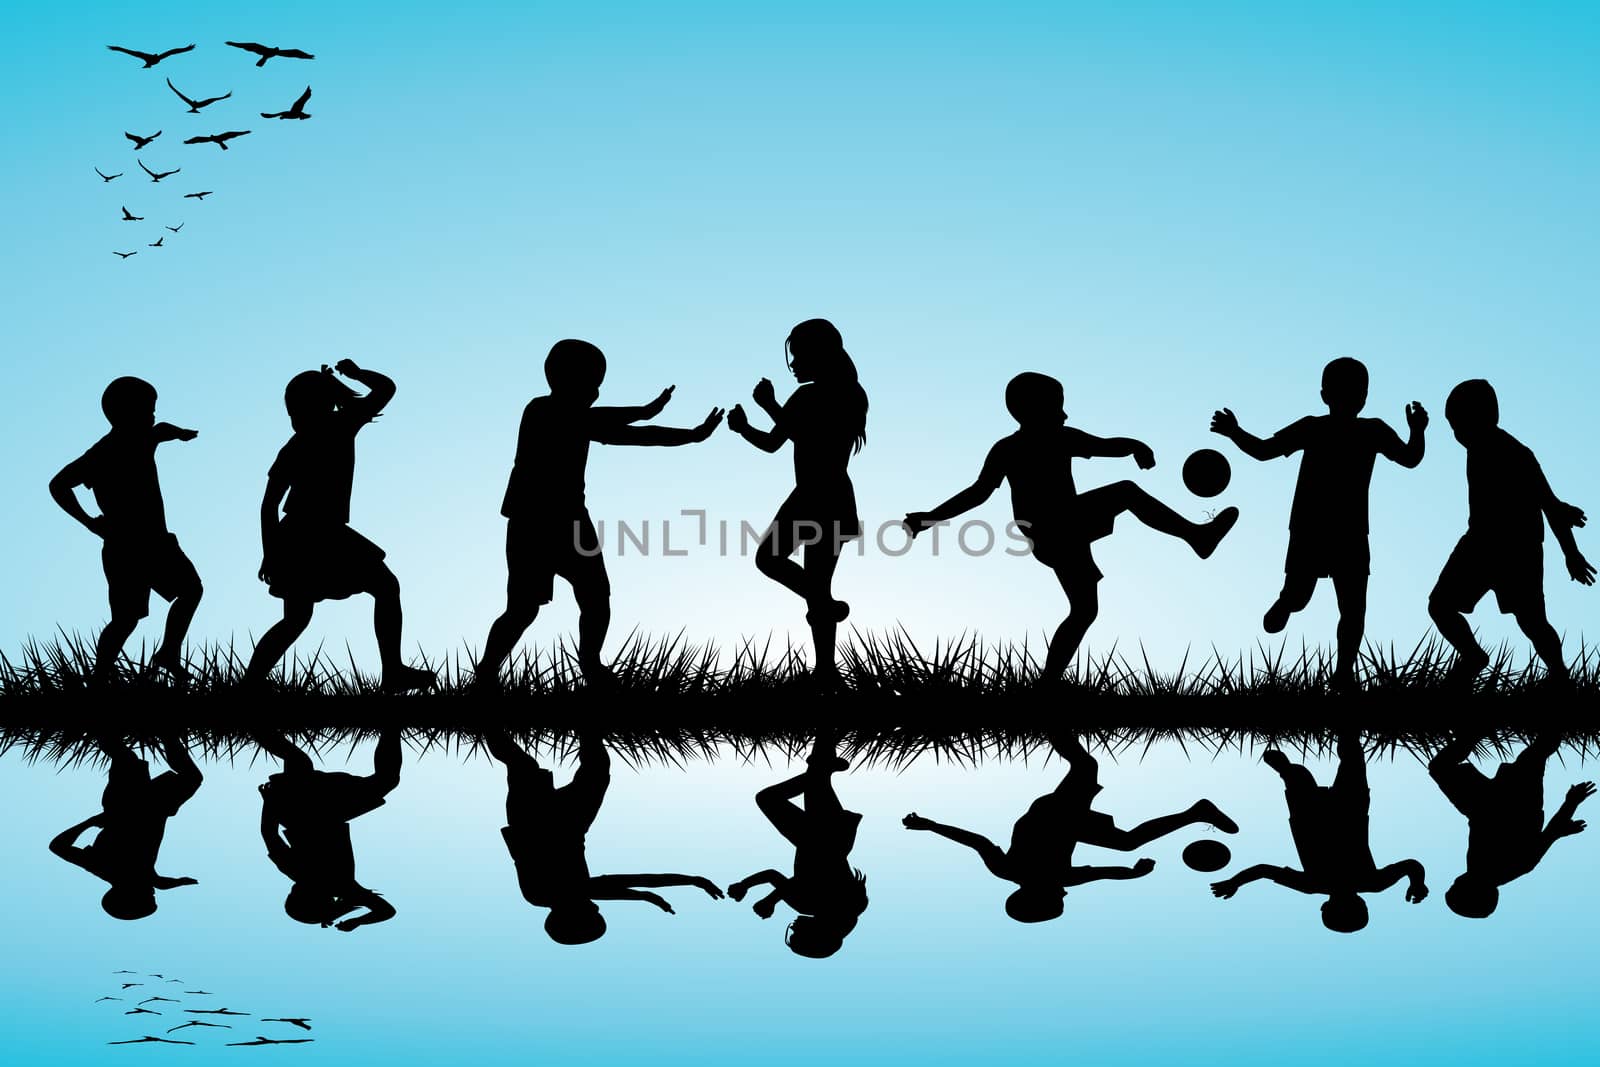 Group of children silhouettes playing outdoor near a lake